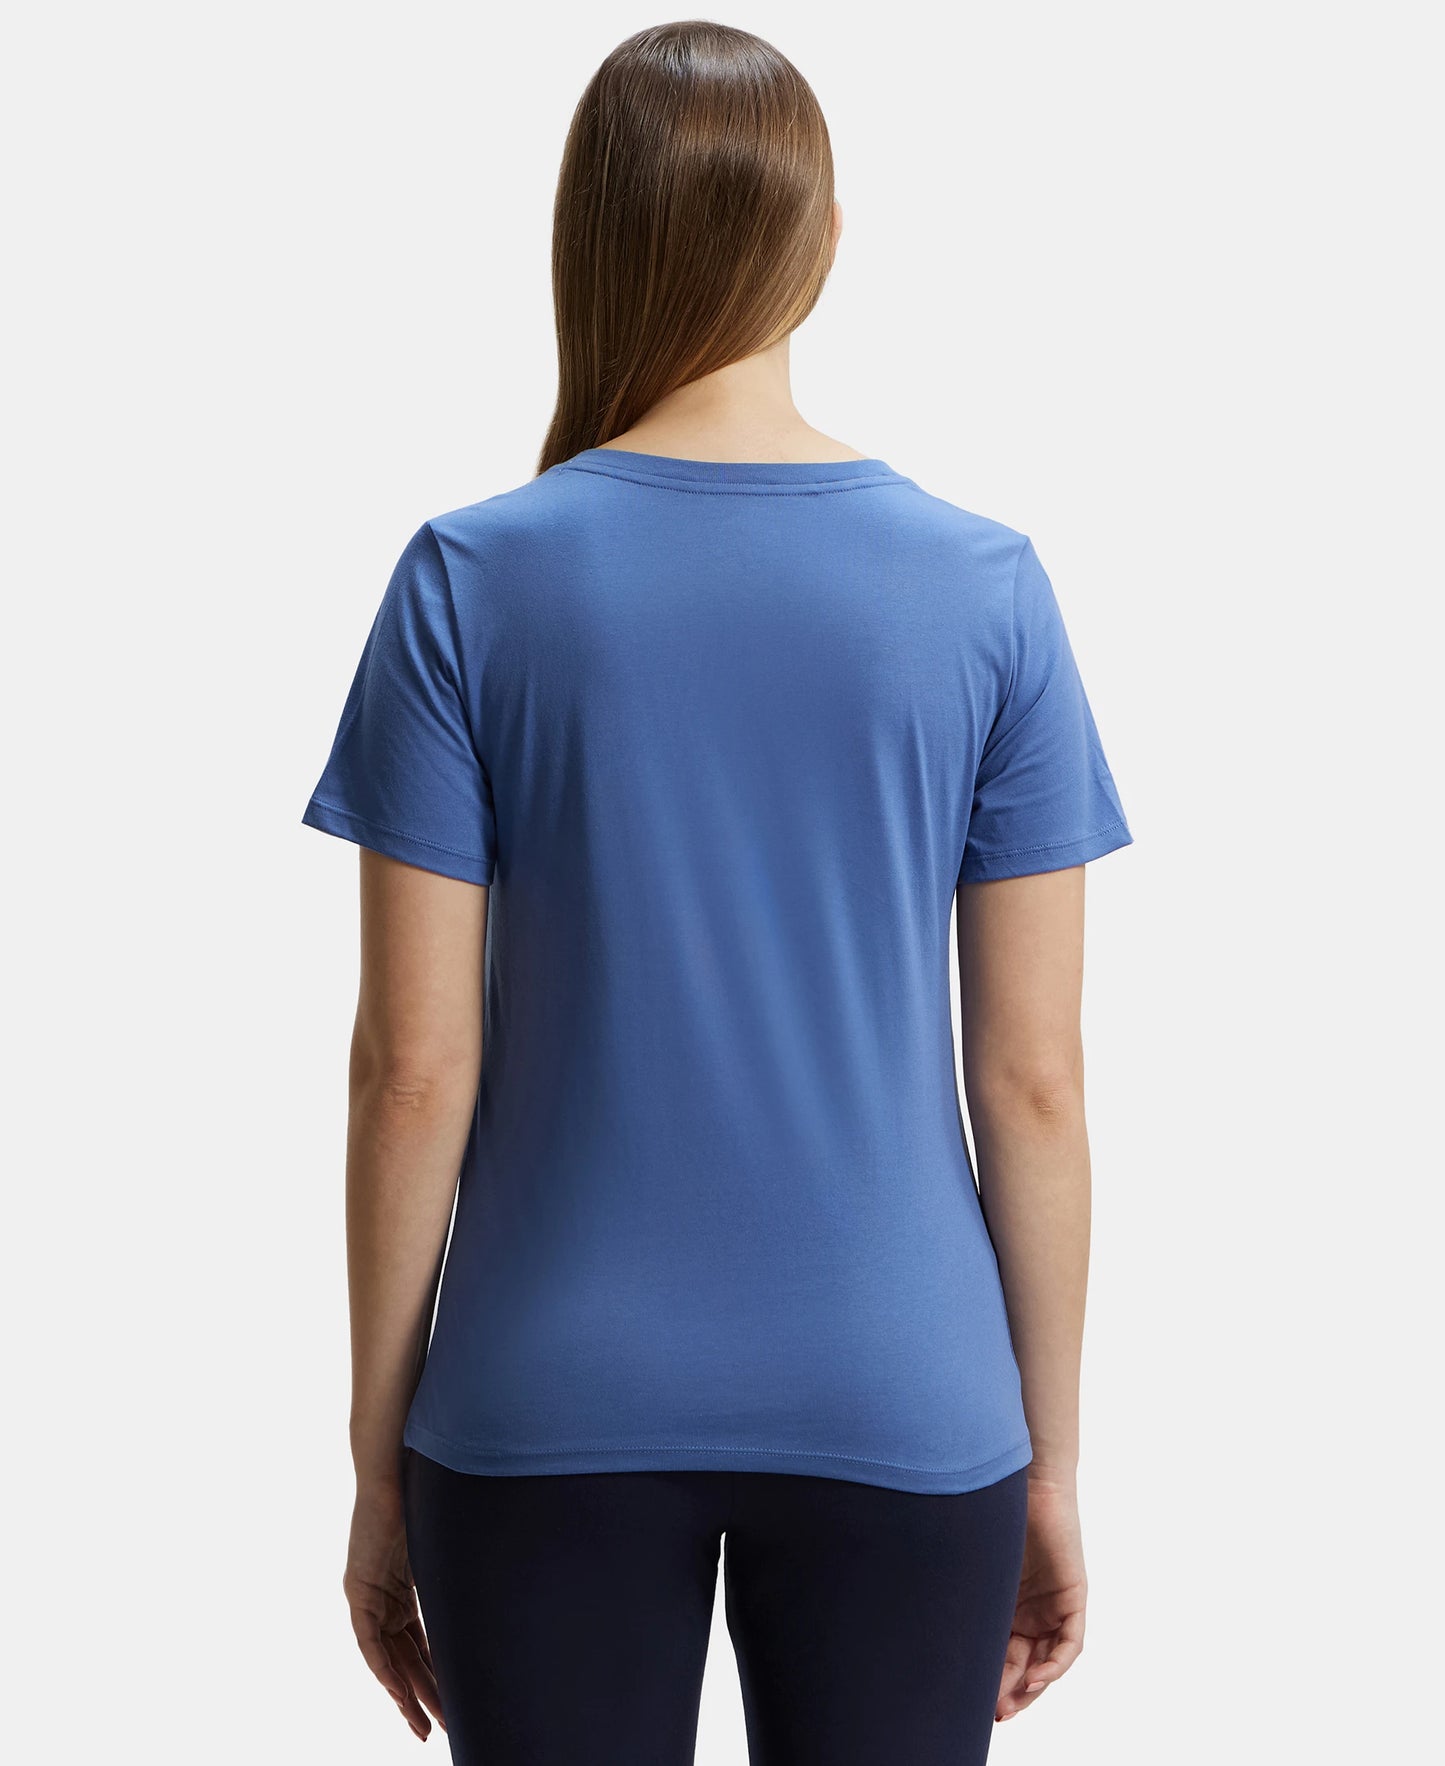 Super Combed Cotton Rich Fabric Relaxed Fit V-Neck Half Sleeve T-Shirt - Topaz Blue-3